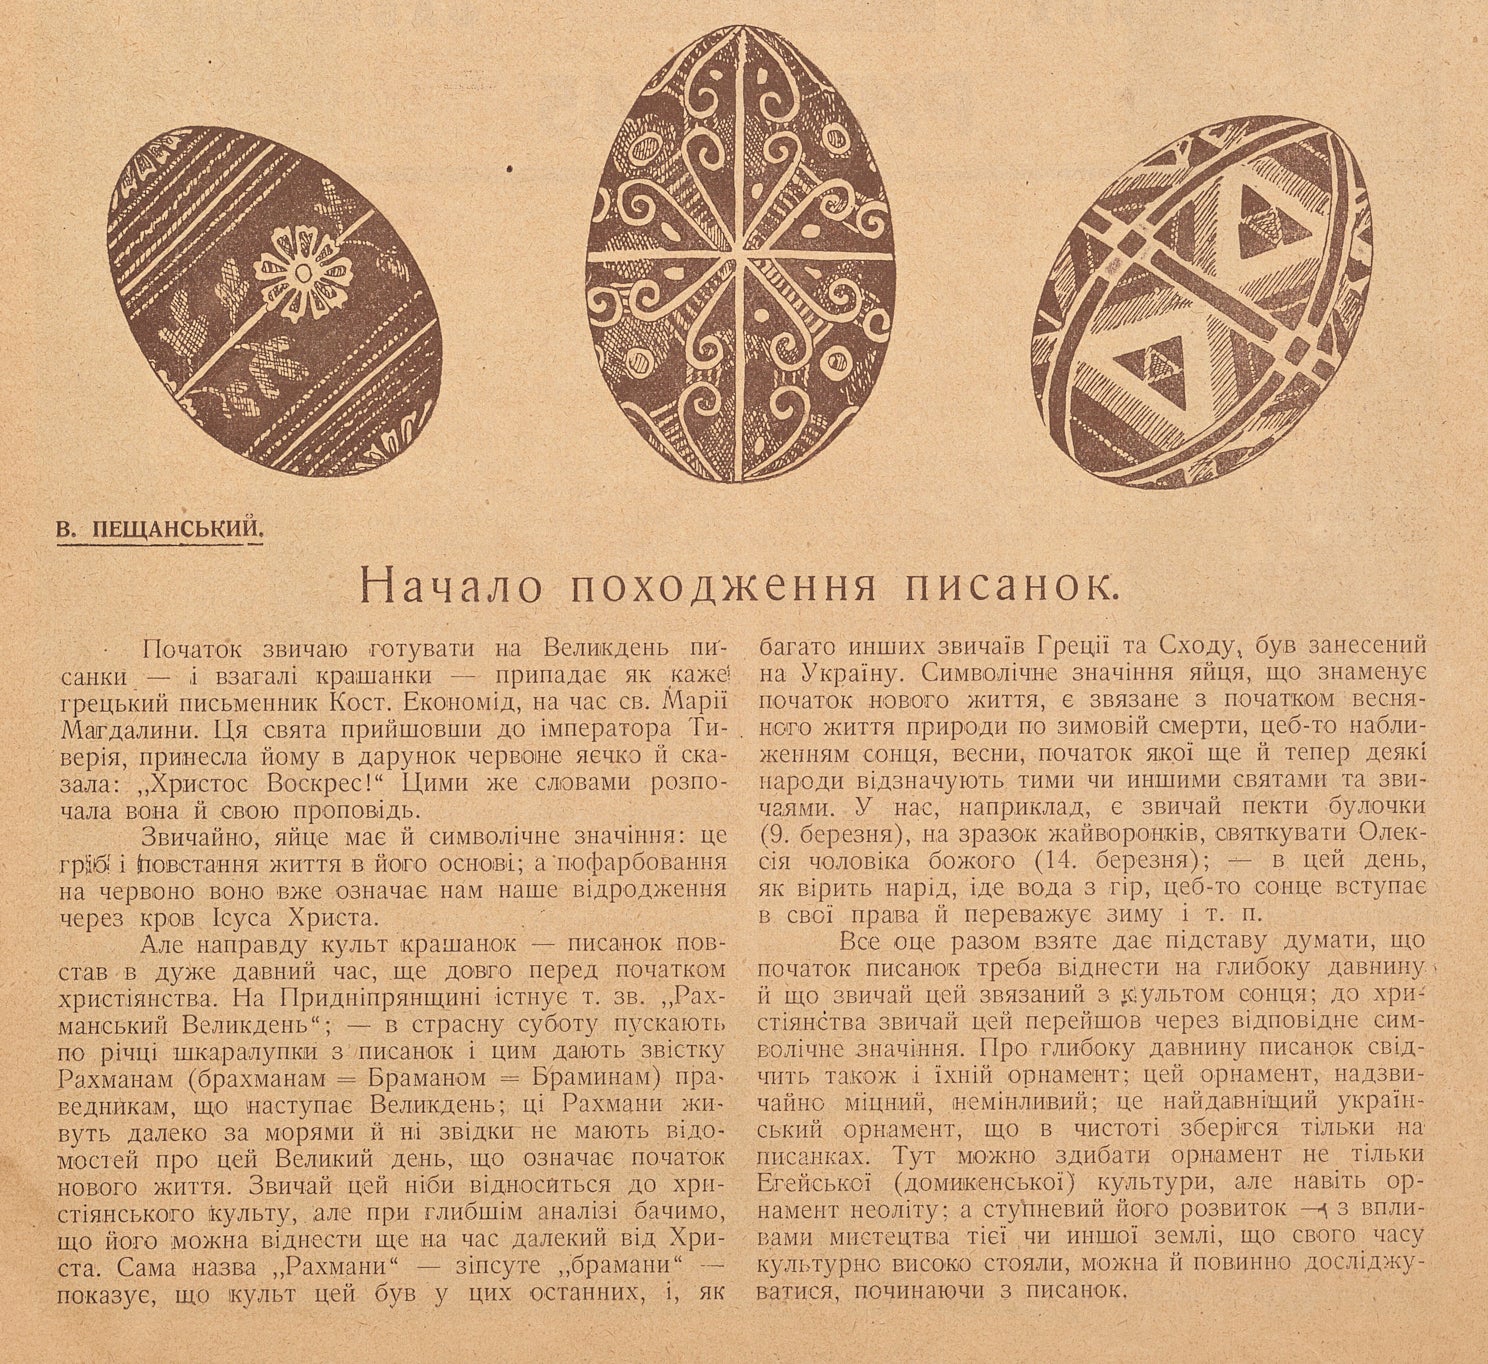 Article from journal with illustration of traditional Ukranian Easter eggs at the top. 